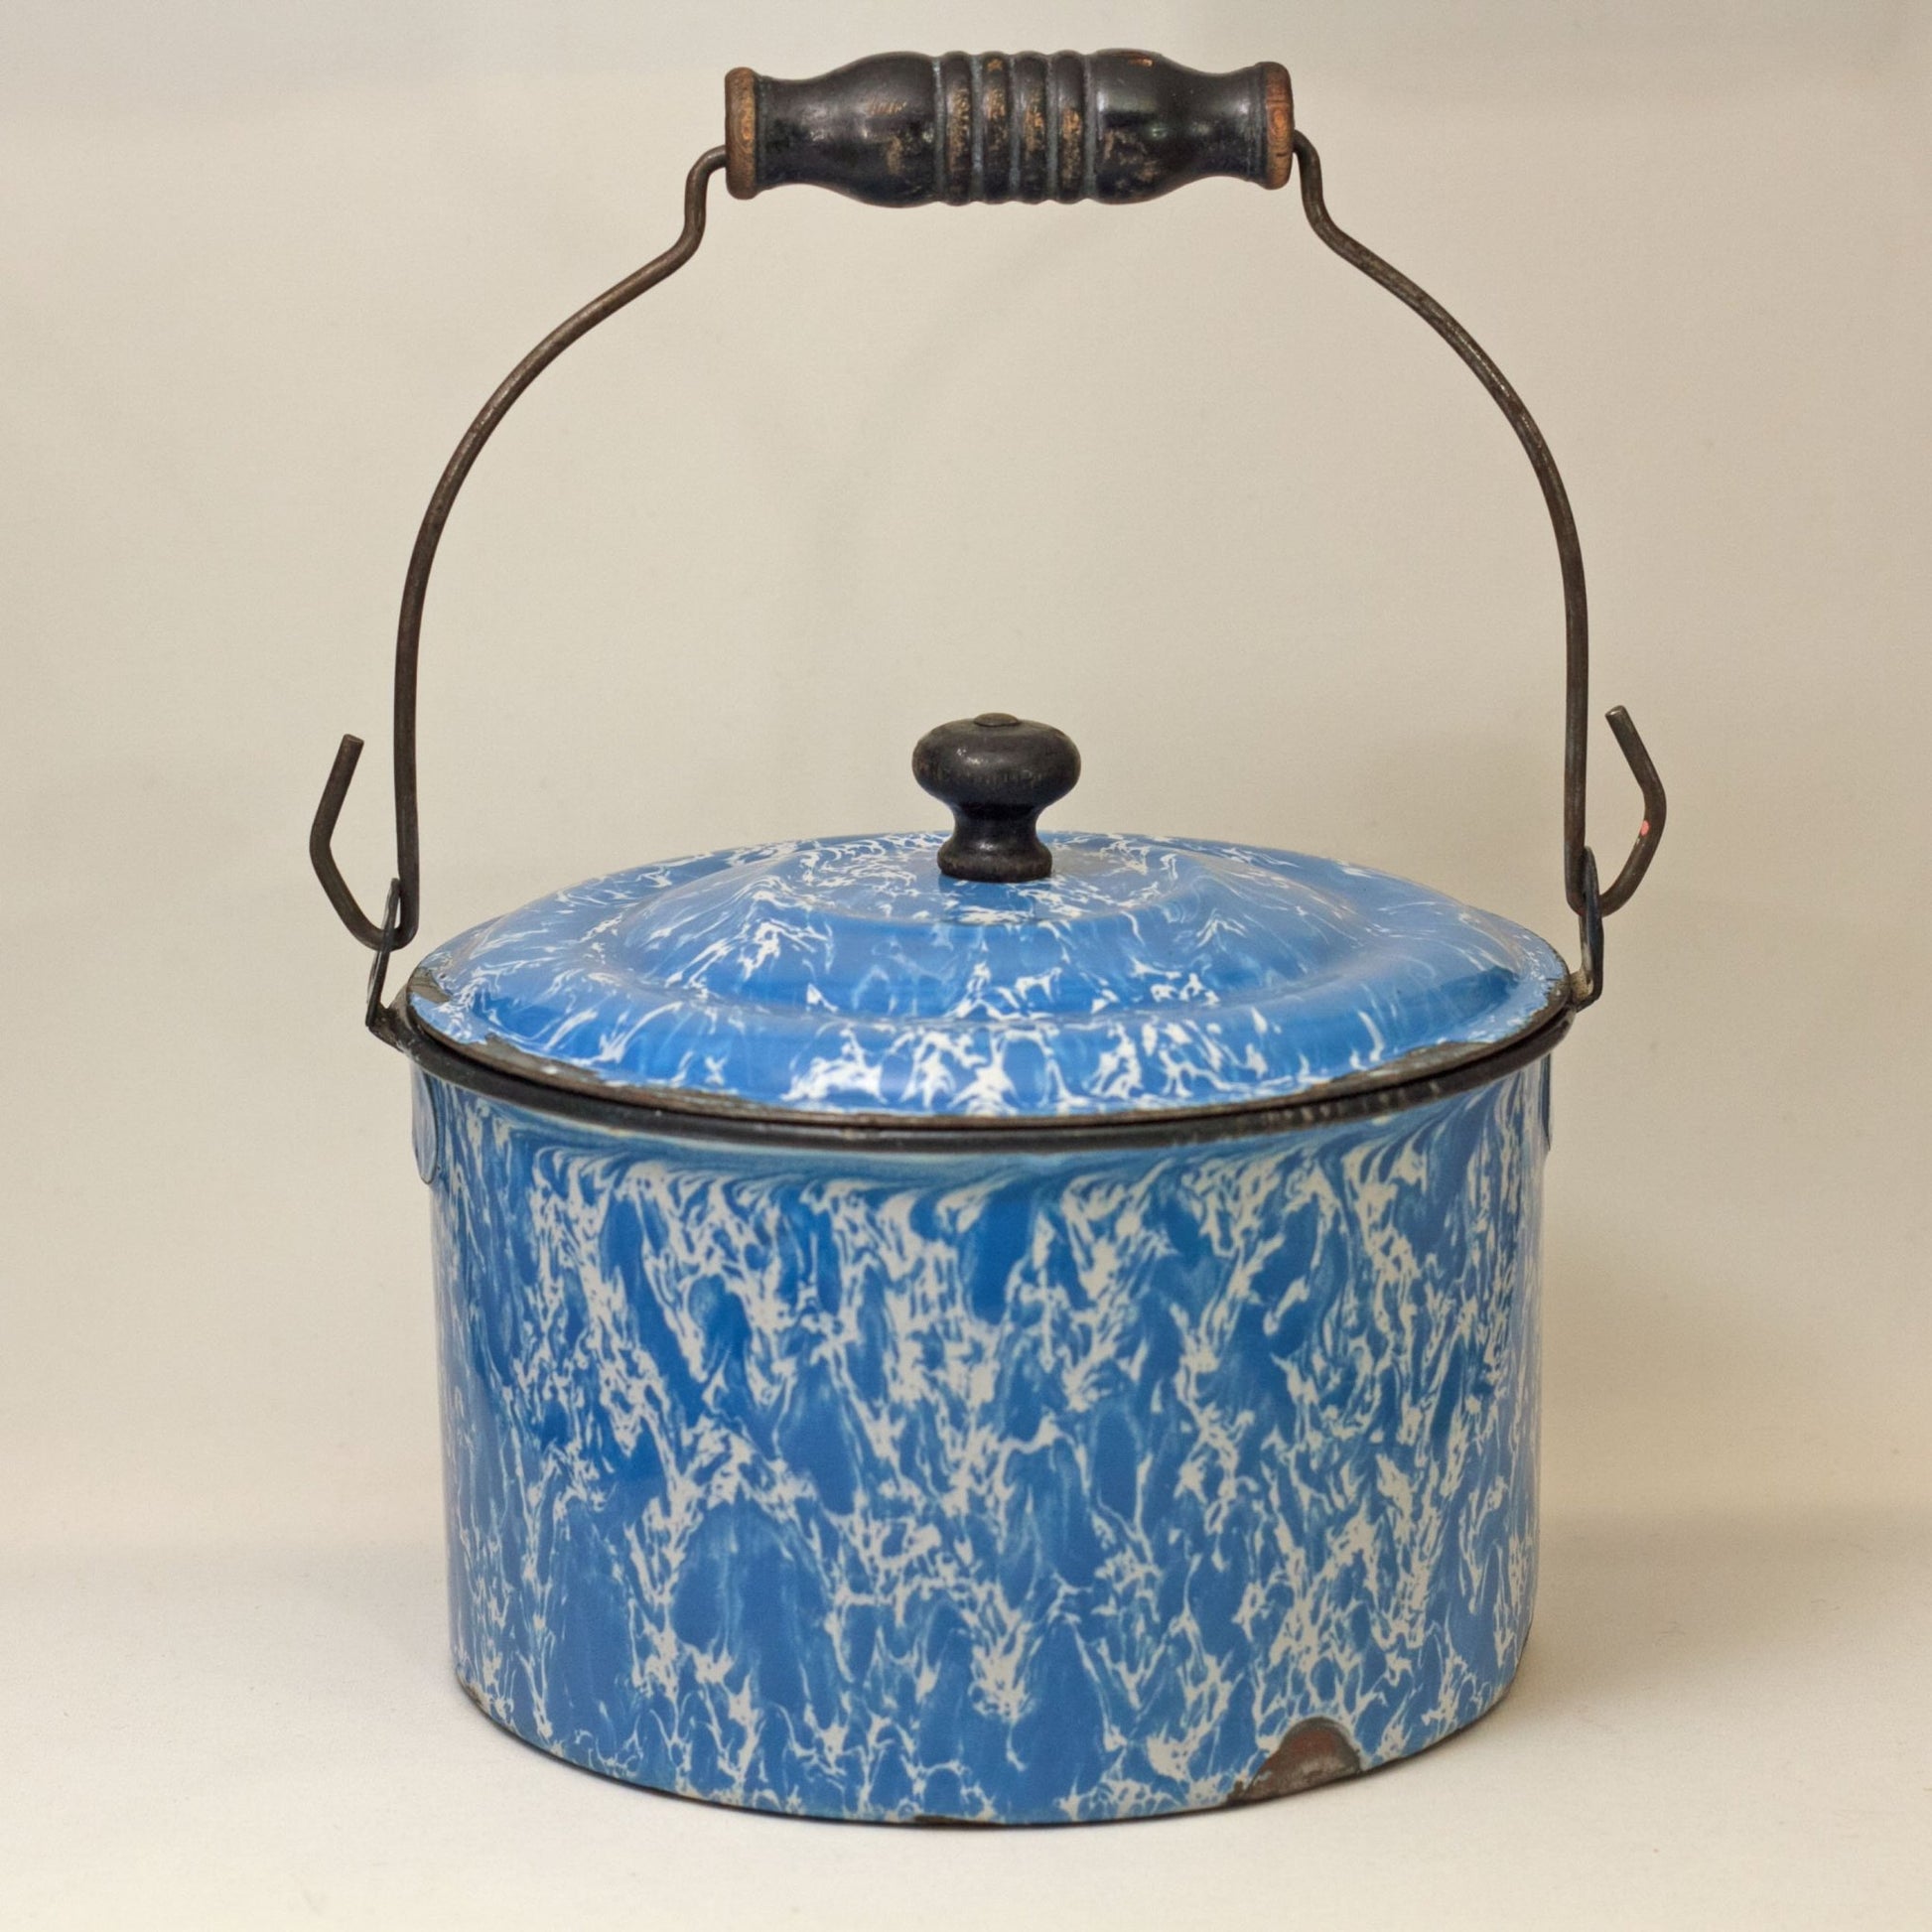 COVERED WATER BUCKET Blue and White Swirl Black Wood Grip Circa 1880 - 1920